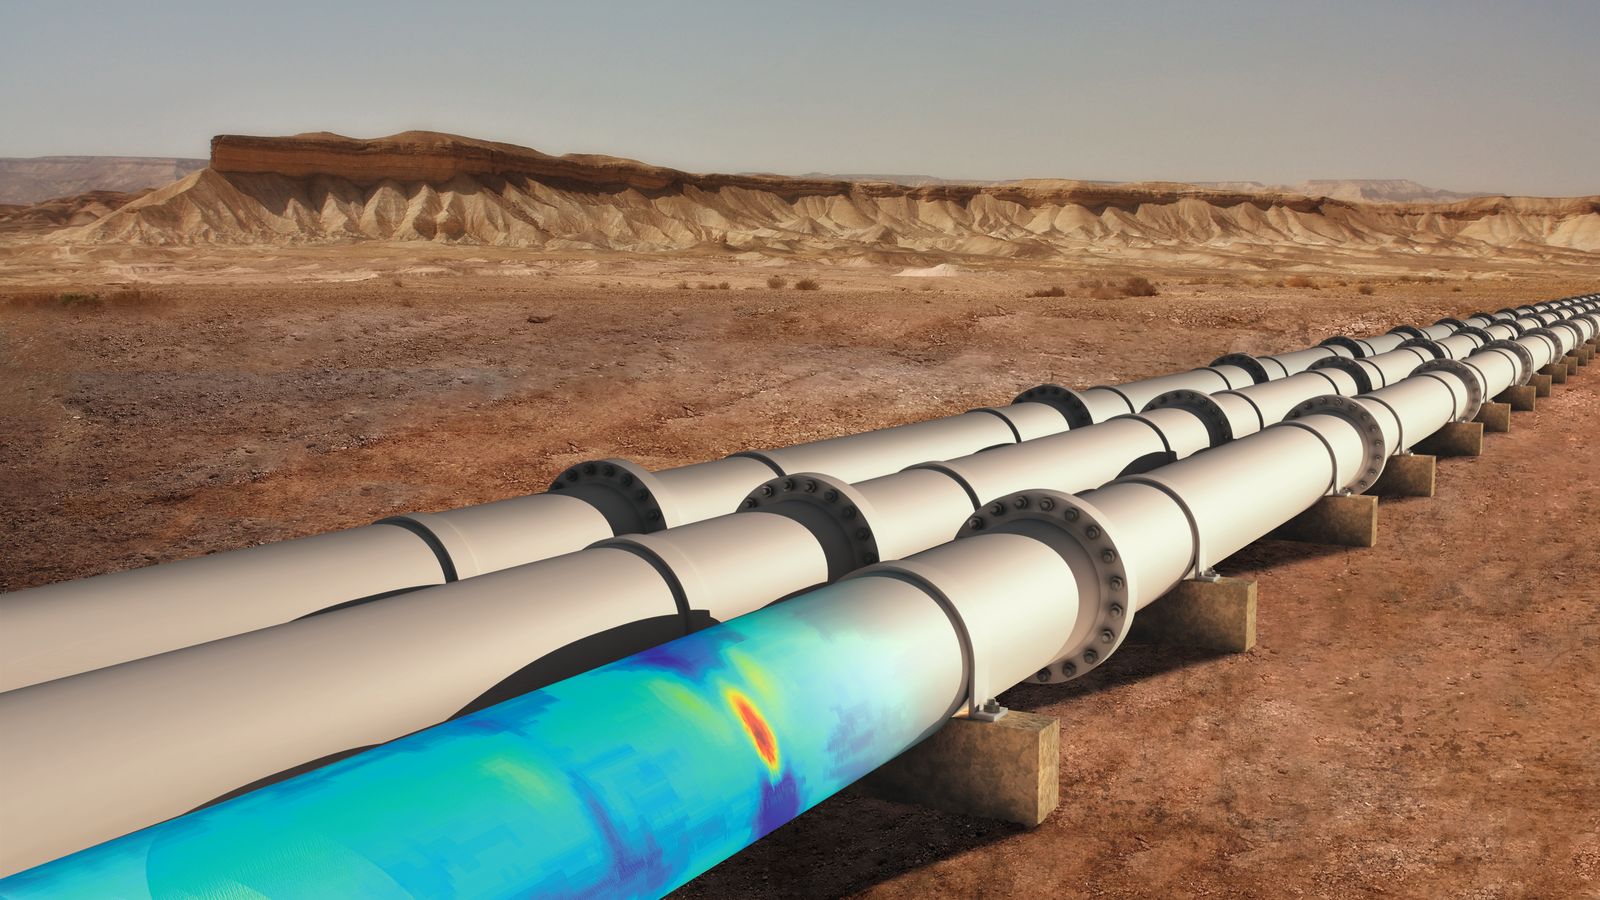 Image of pipelines in the dessert